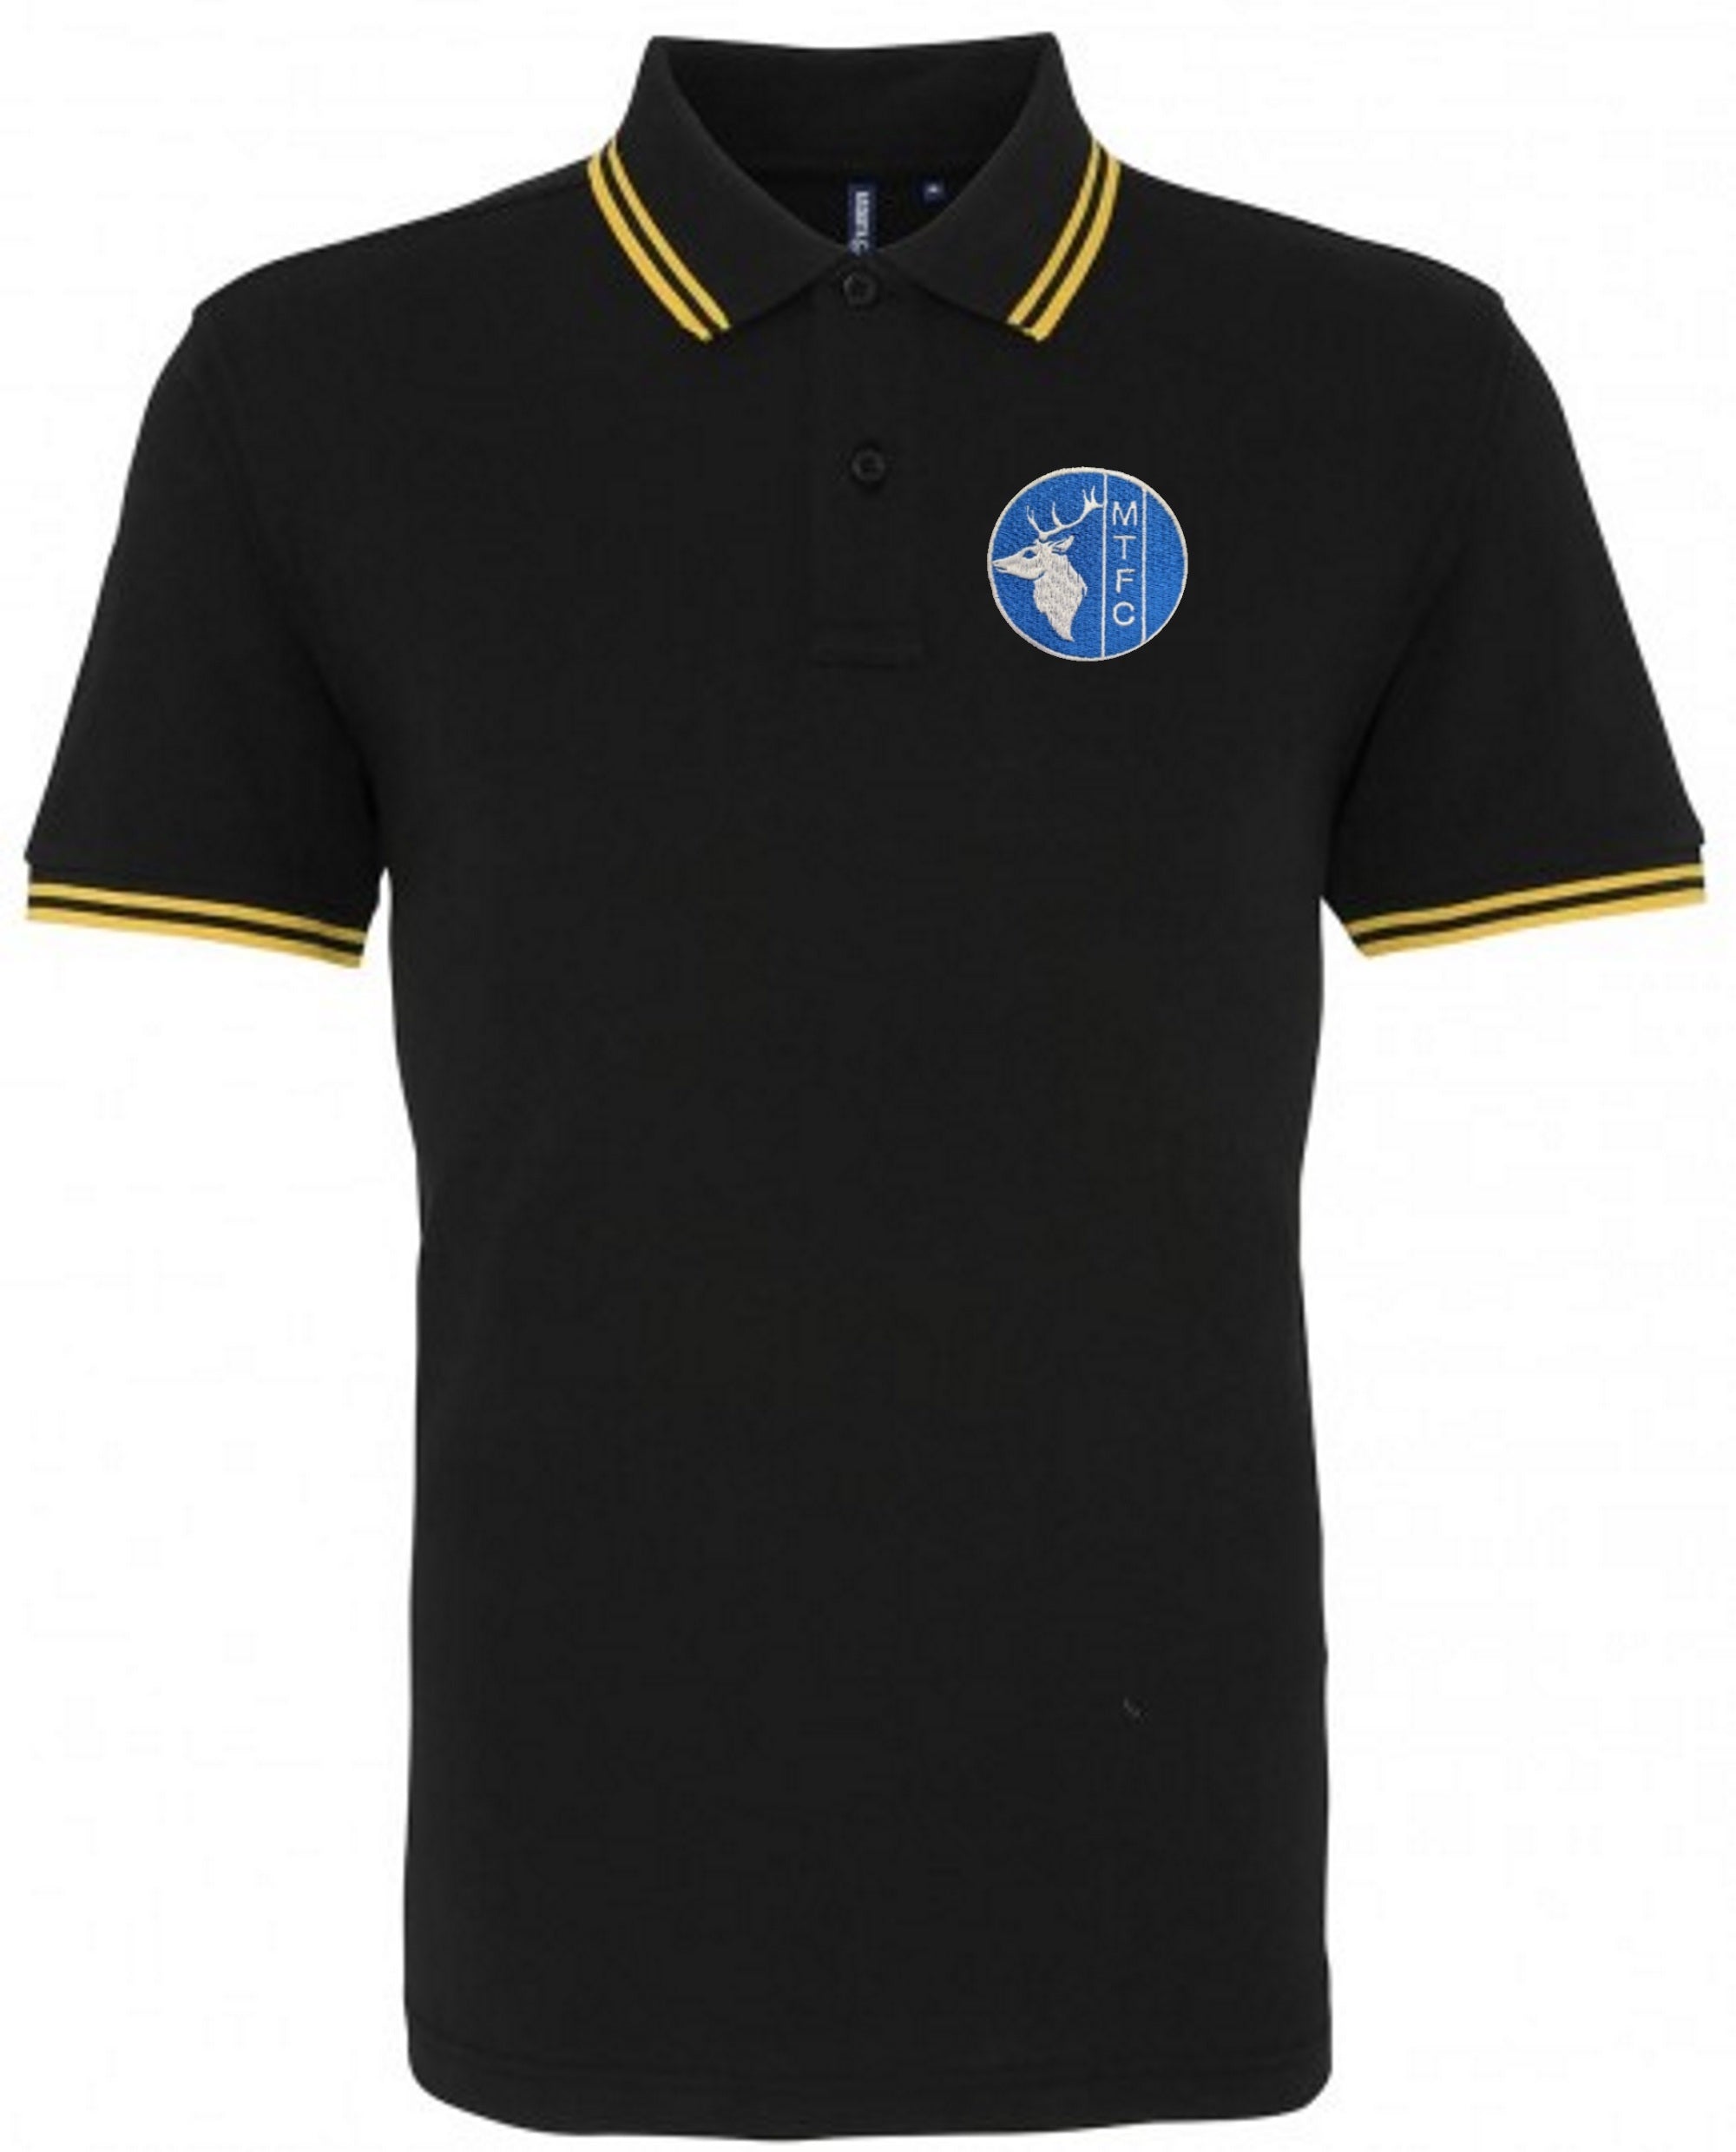 Mansfield Town Retro 1970s Football Iconic Polo Shirt – Old School Football